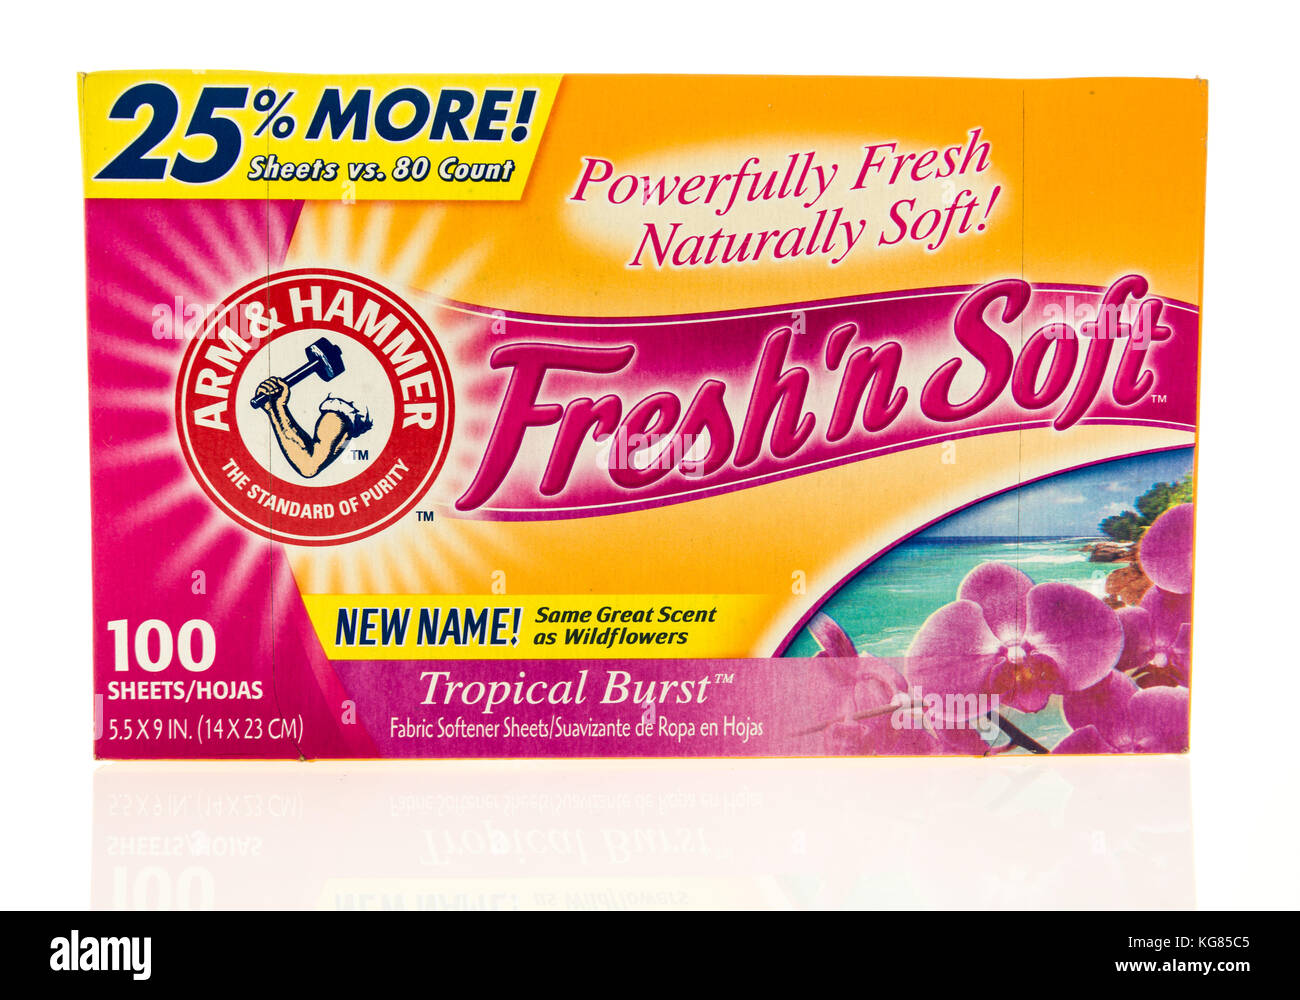 Winneconne, WI - 31 October 2017:  A container of Arm & Hammer Fresh'n Soft fabric softner sheets on an isolated background. Stock Photo